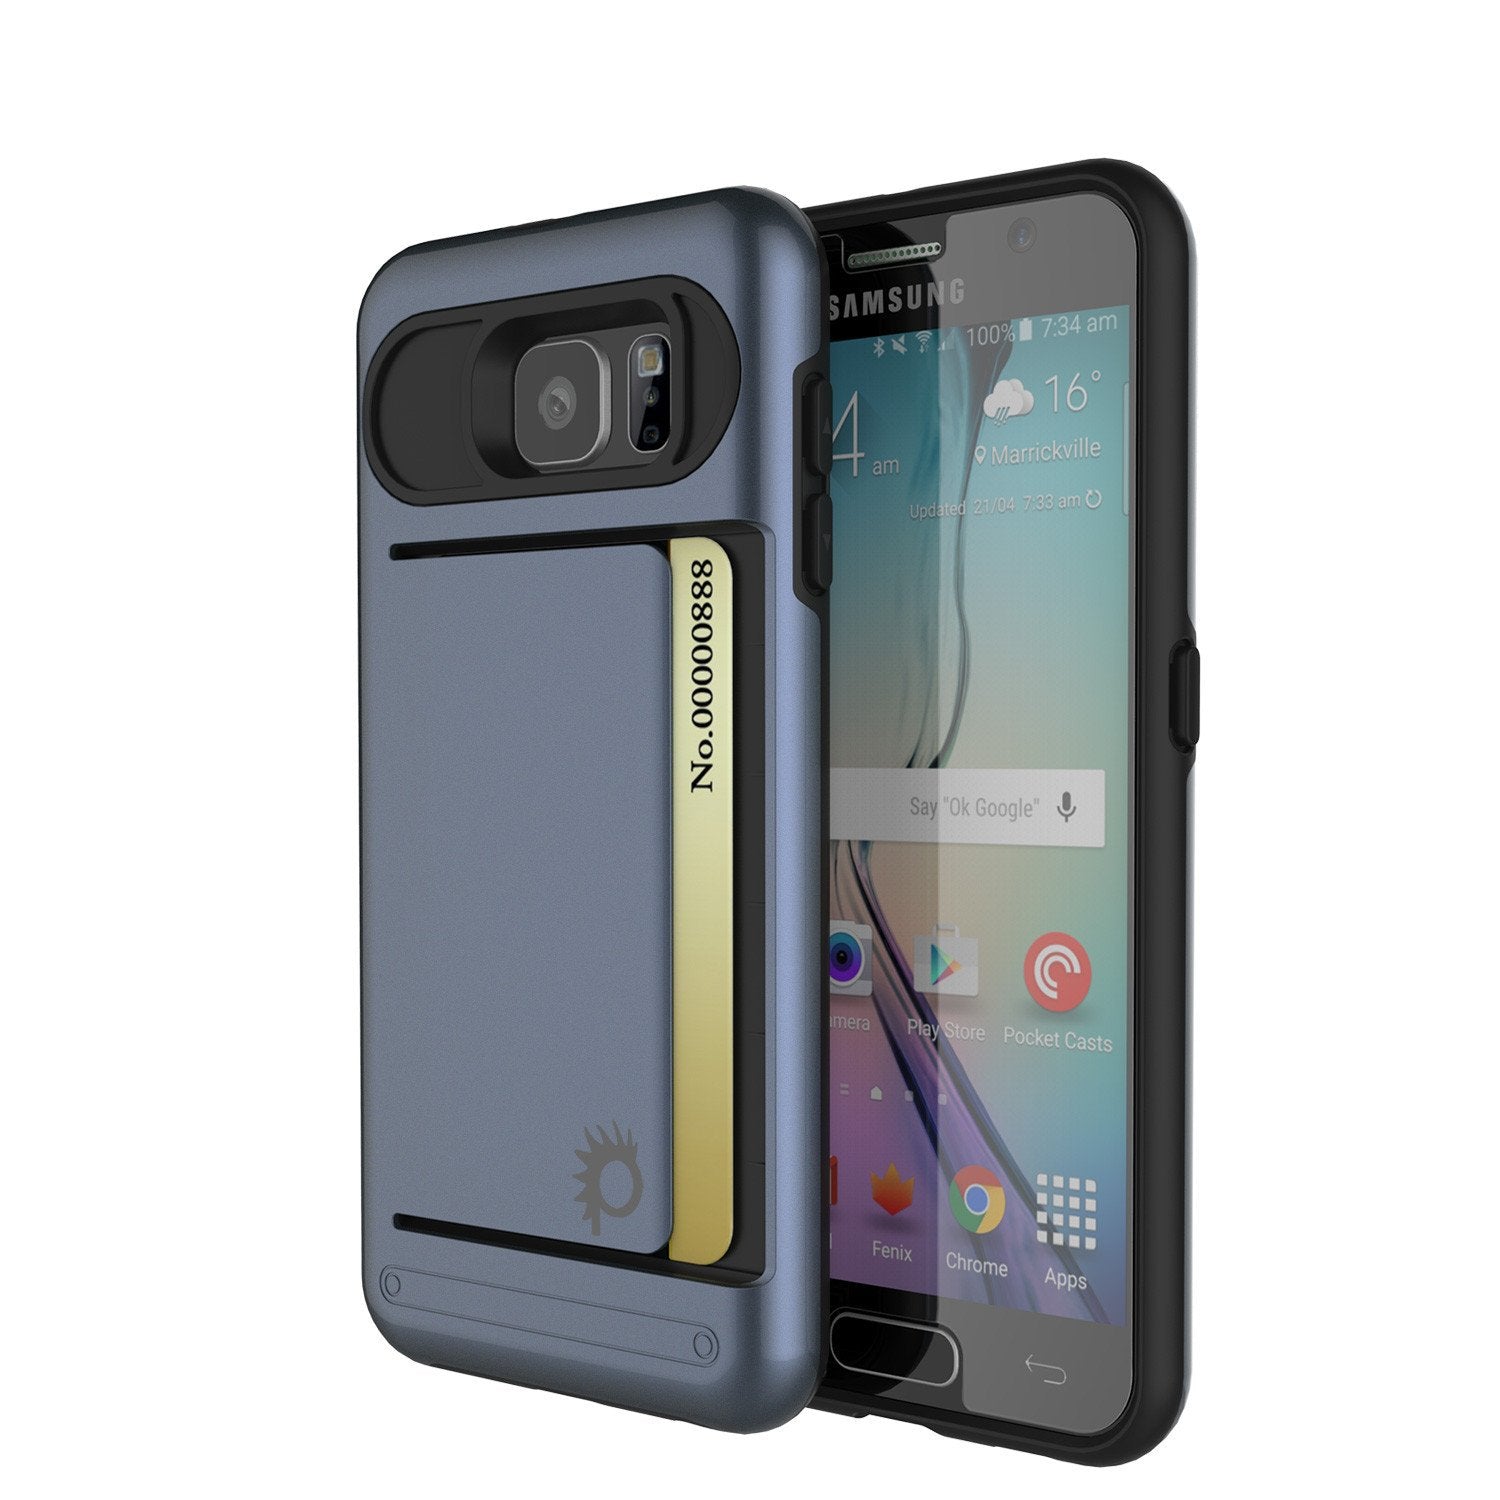 Galaxy S6 EDGE Plus Case PunkCase CLUTCH Navy Series Slim Armor Soft Cover Case w/ Screen Protector